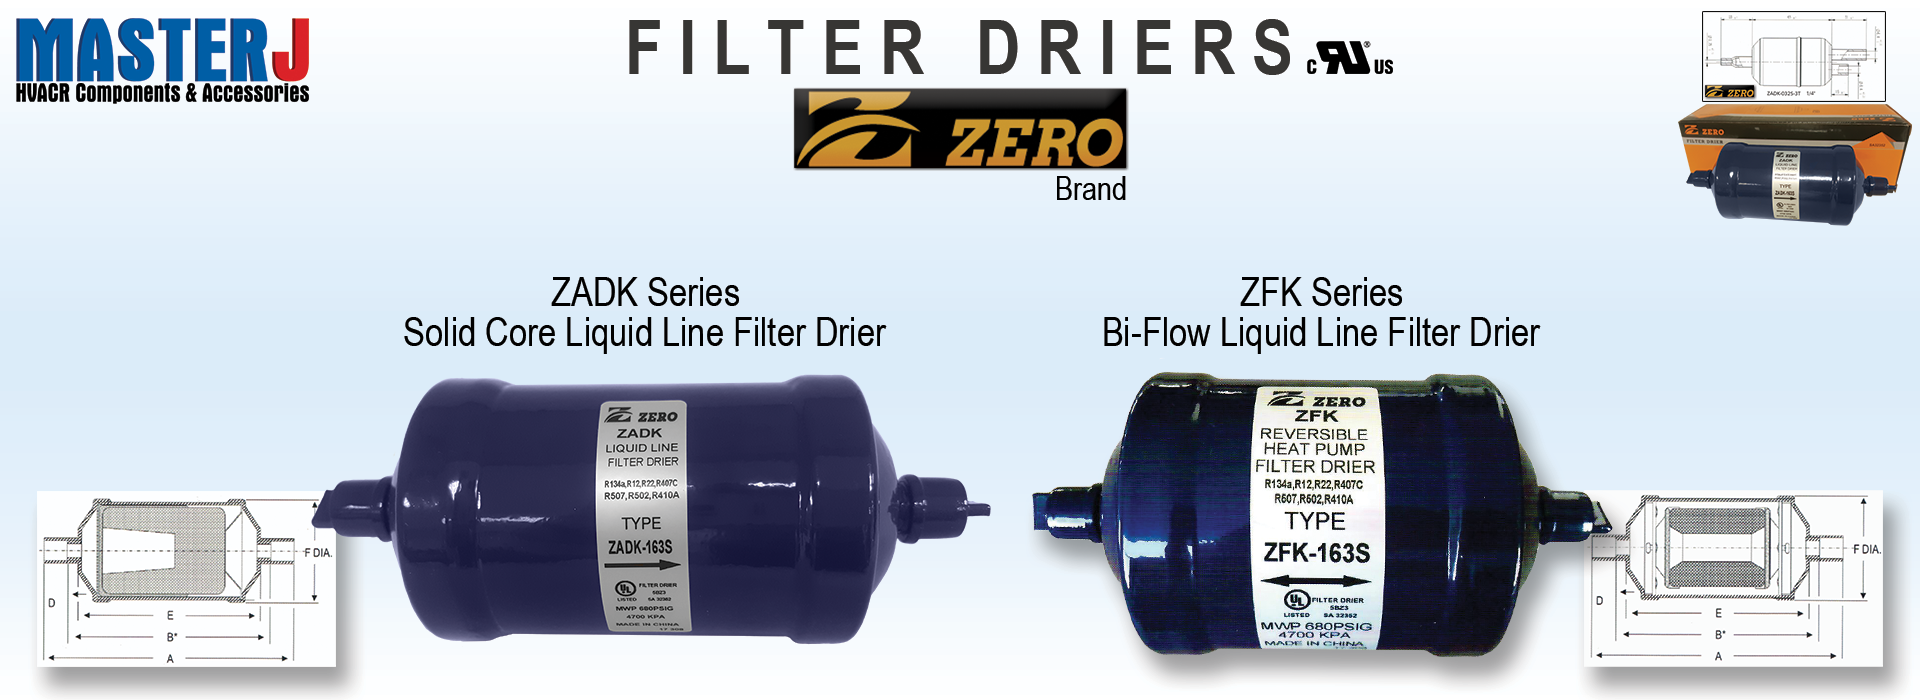 Filter Driers for HVACR - ZFK and ZADK Series from MASTERJ and Zero